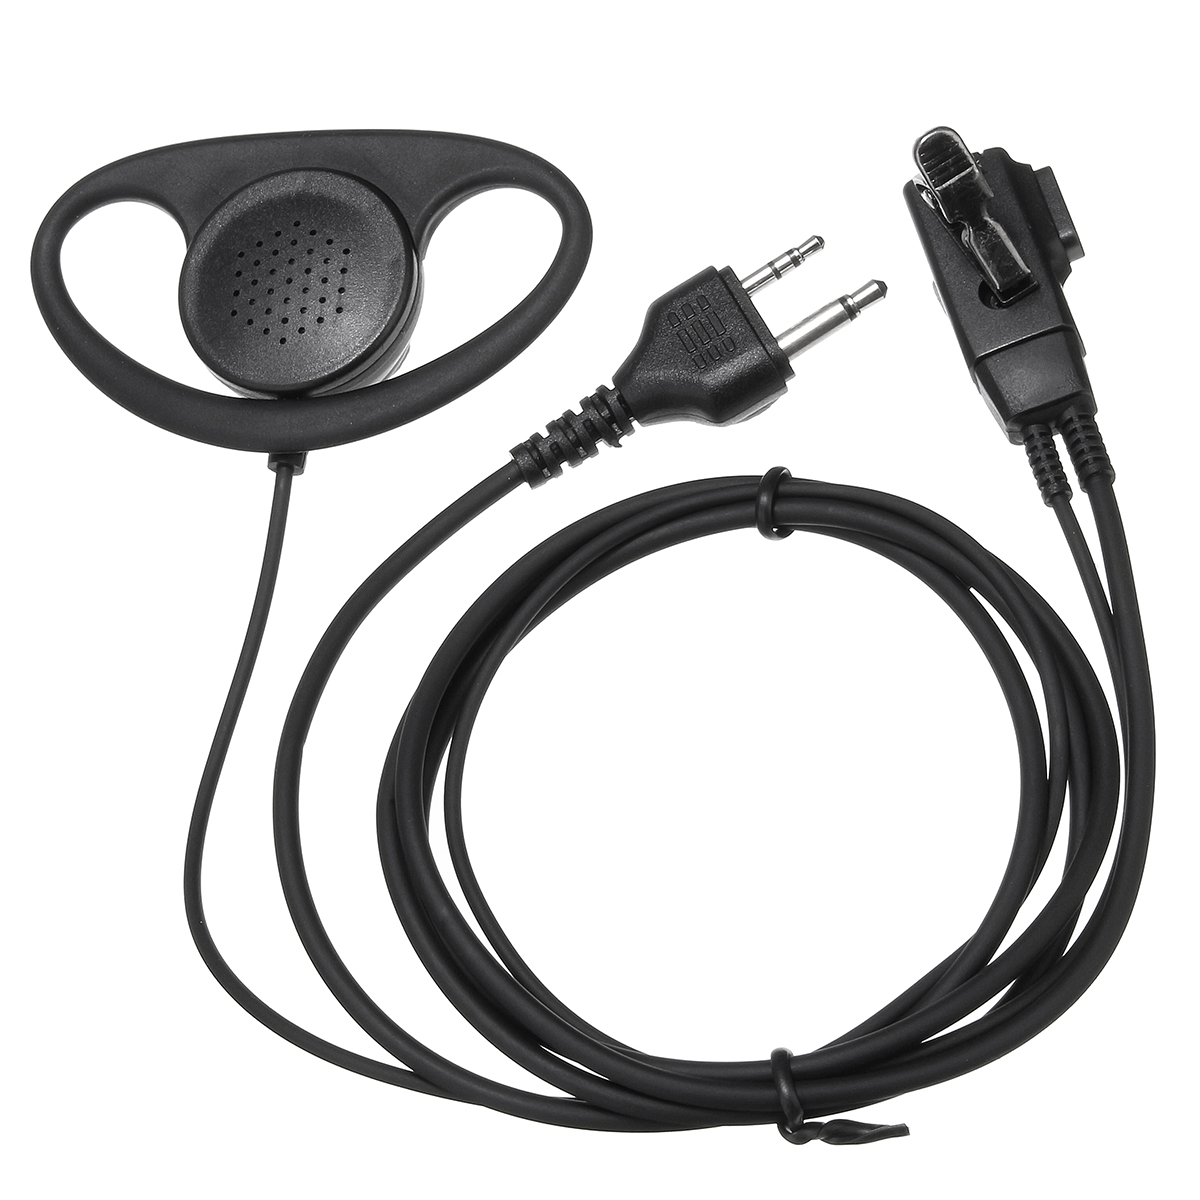 

2 Pin Covert Acoustic Air Tube Earpiece Headset For Midland Walkie Talkie